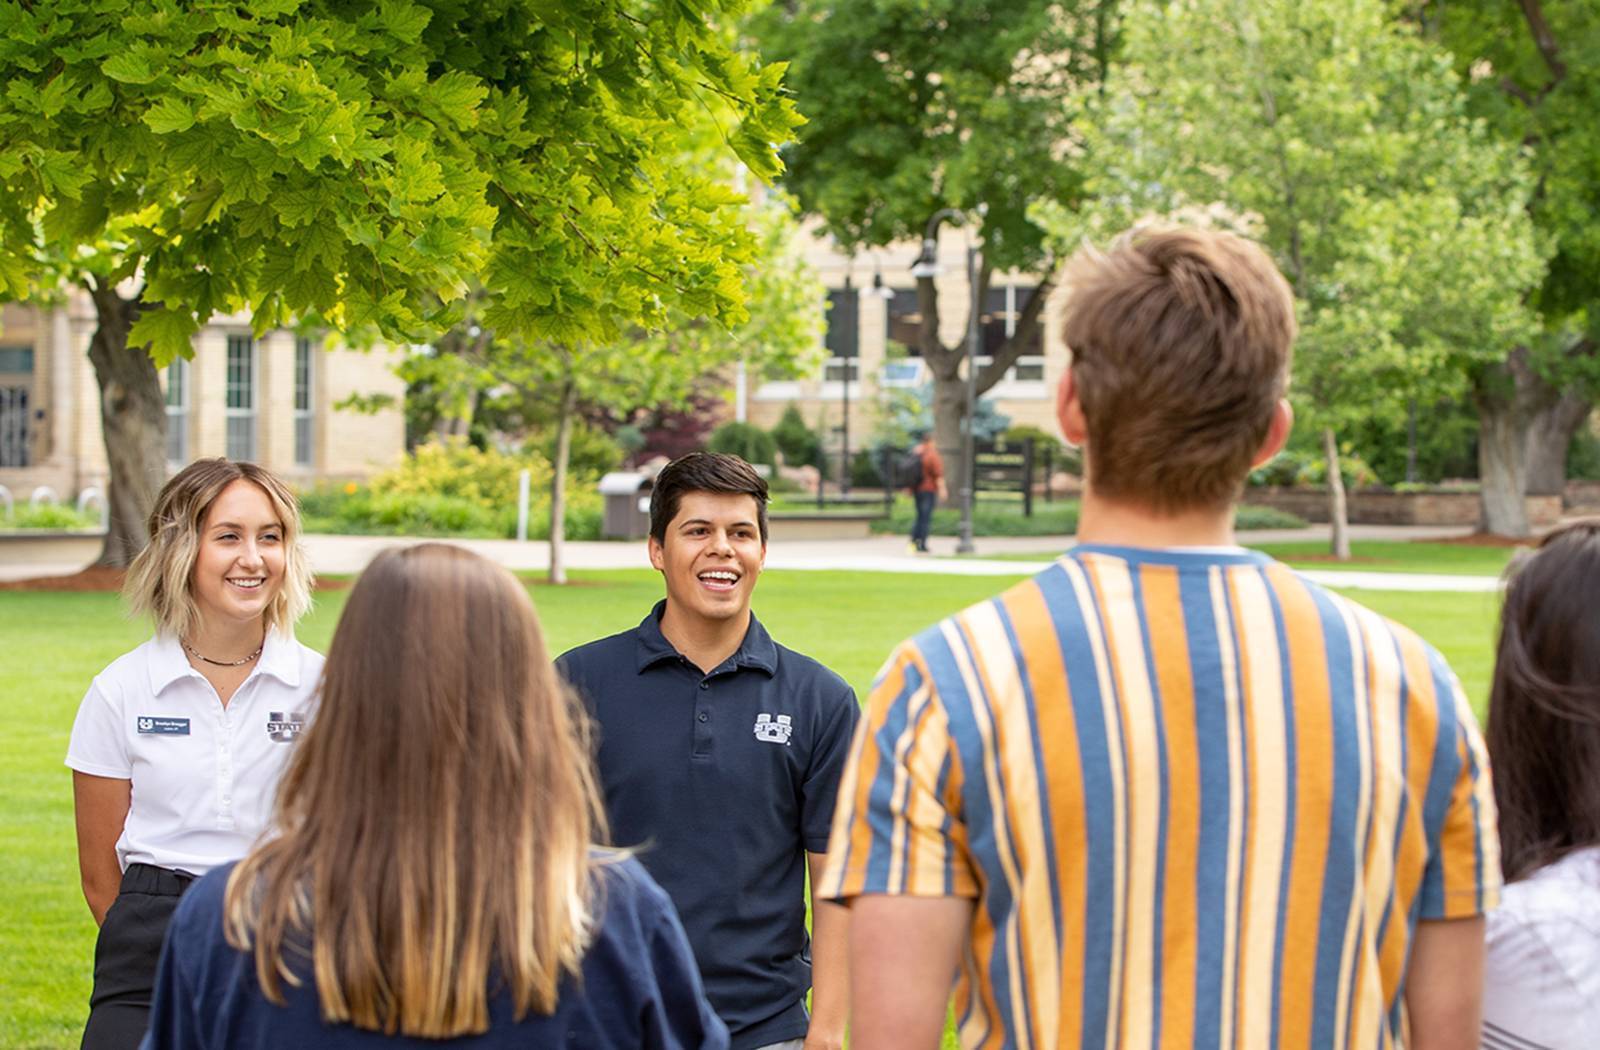 Events for Future Students | Admissions | USU